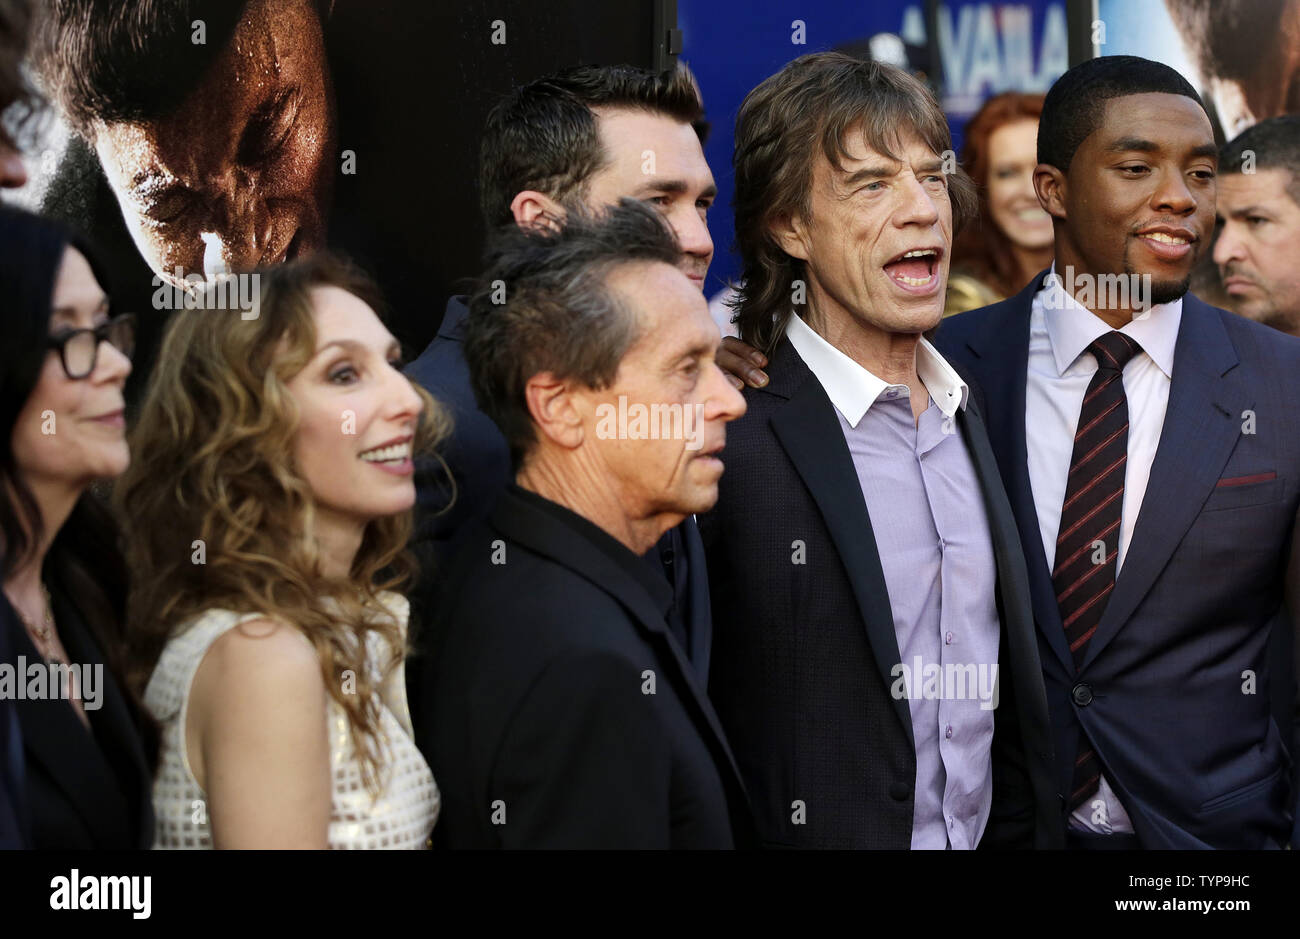 Victoria Pearman, Erica Huggins, Brian Grazer, Tate Taylor, Mick Jagger and Chadwick Boseman arrive on the red carpet at the world premiere of 'Get On Up' at the Apollo Theater in New York City on July 21, 2014. The movie is a chronicle of James Brown's rise from extreme poverty to become one of the most influential musicians in history.      UPI/John Angelillo Stock Photo